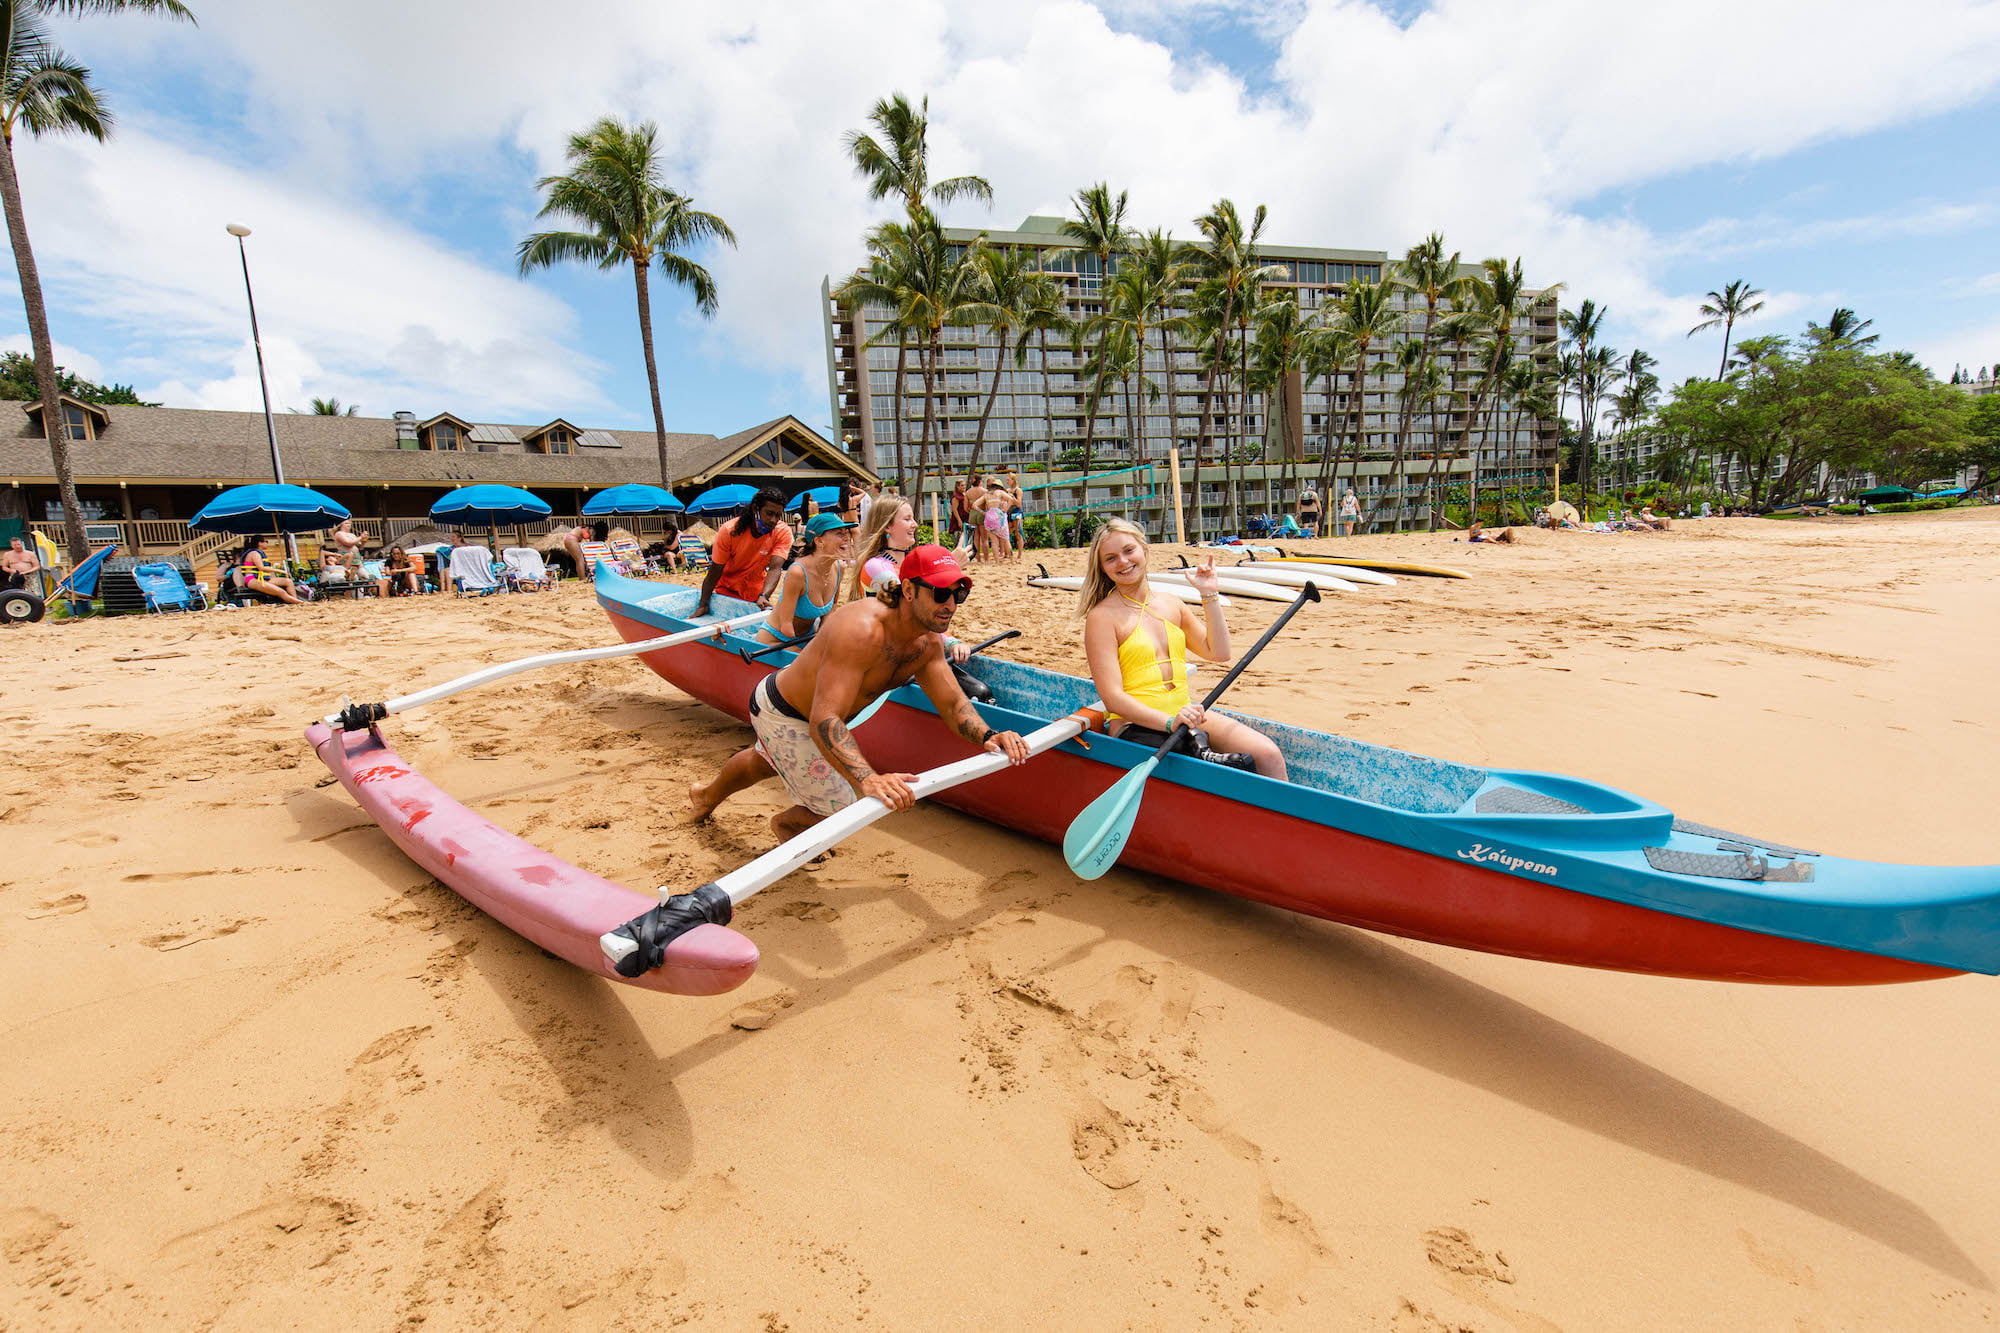 Retreat attendees getting pushed into the water in their outrigger canoe